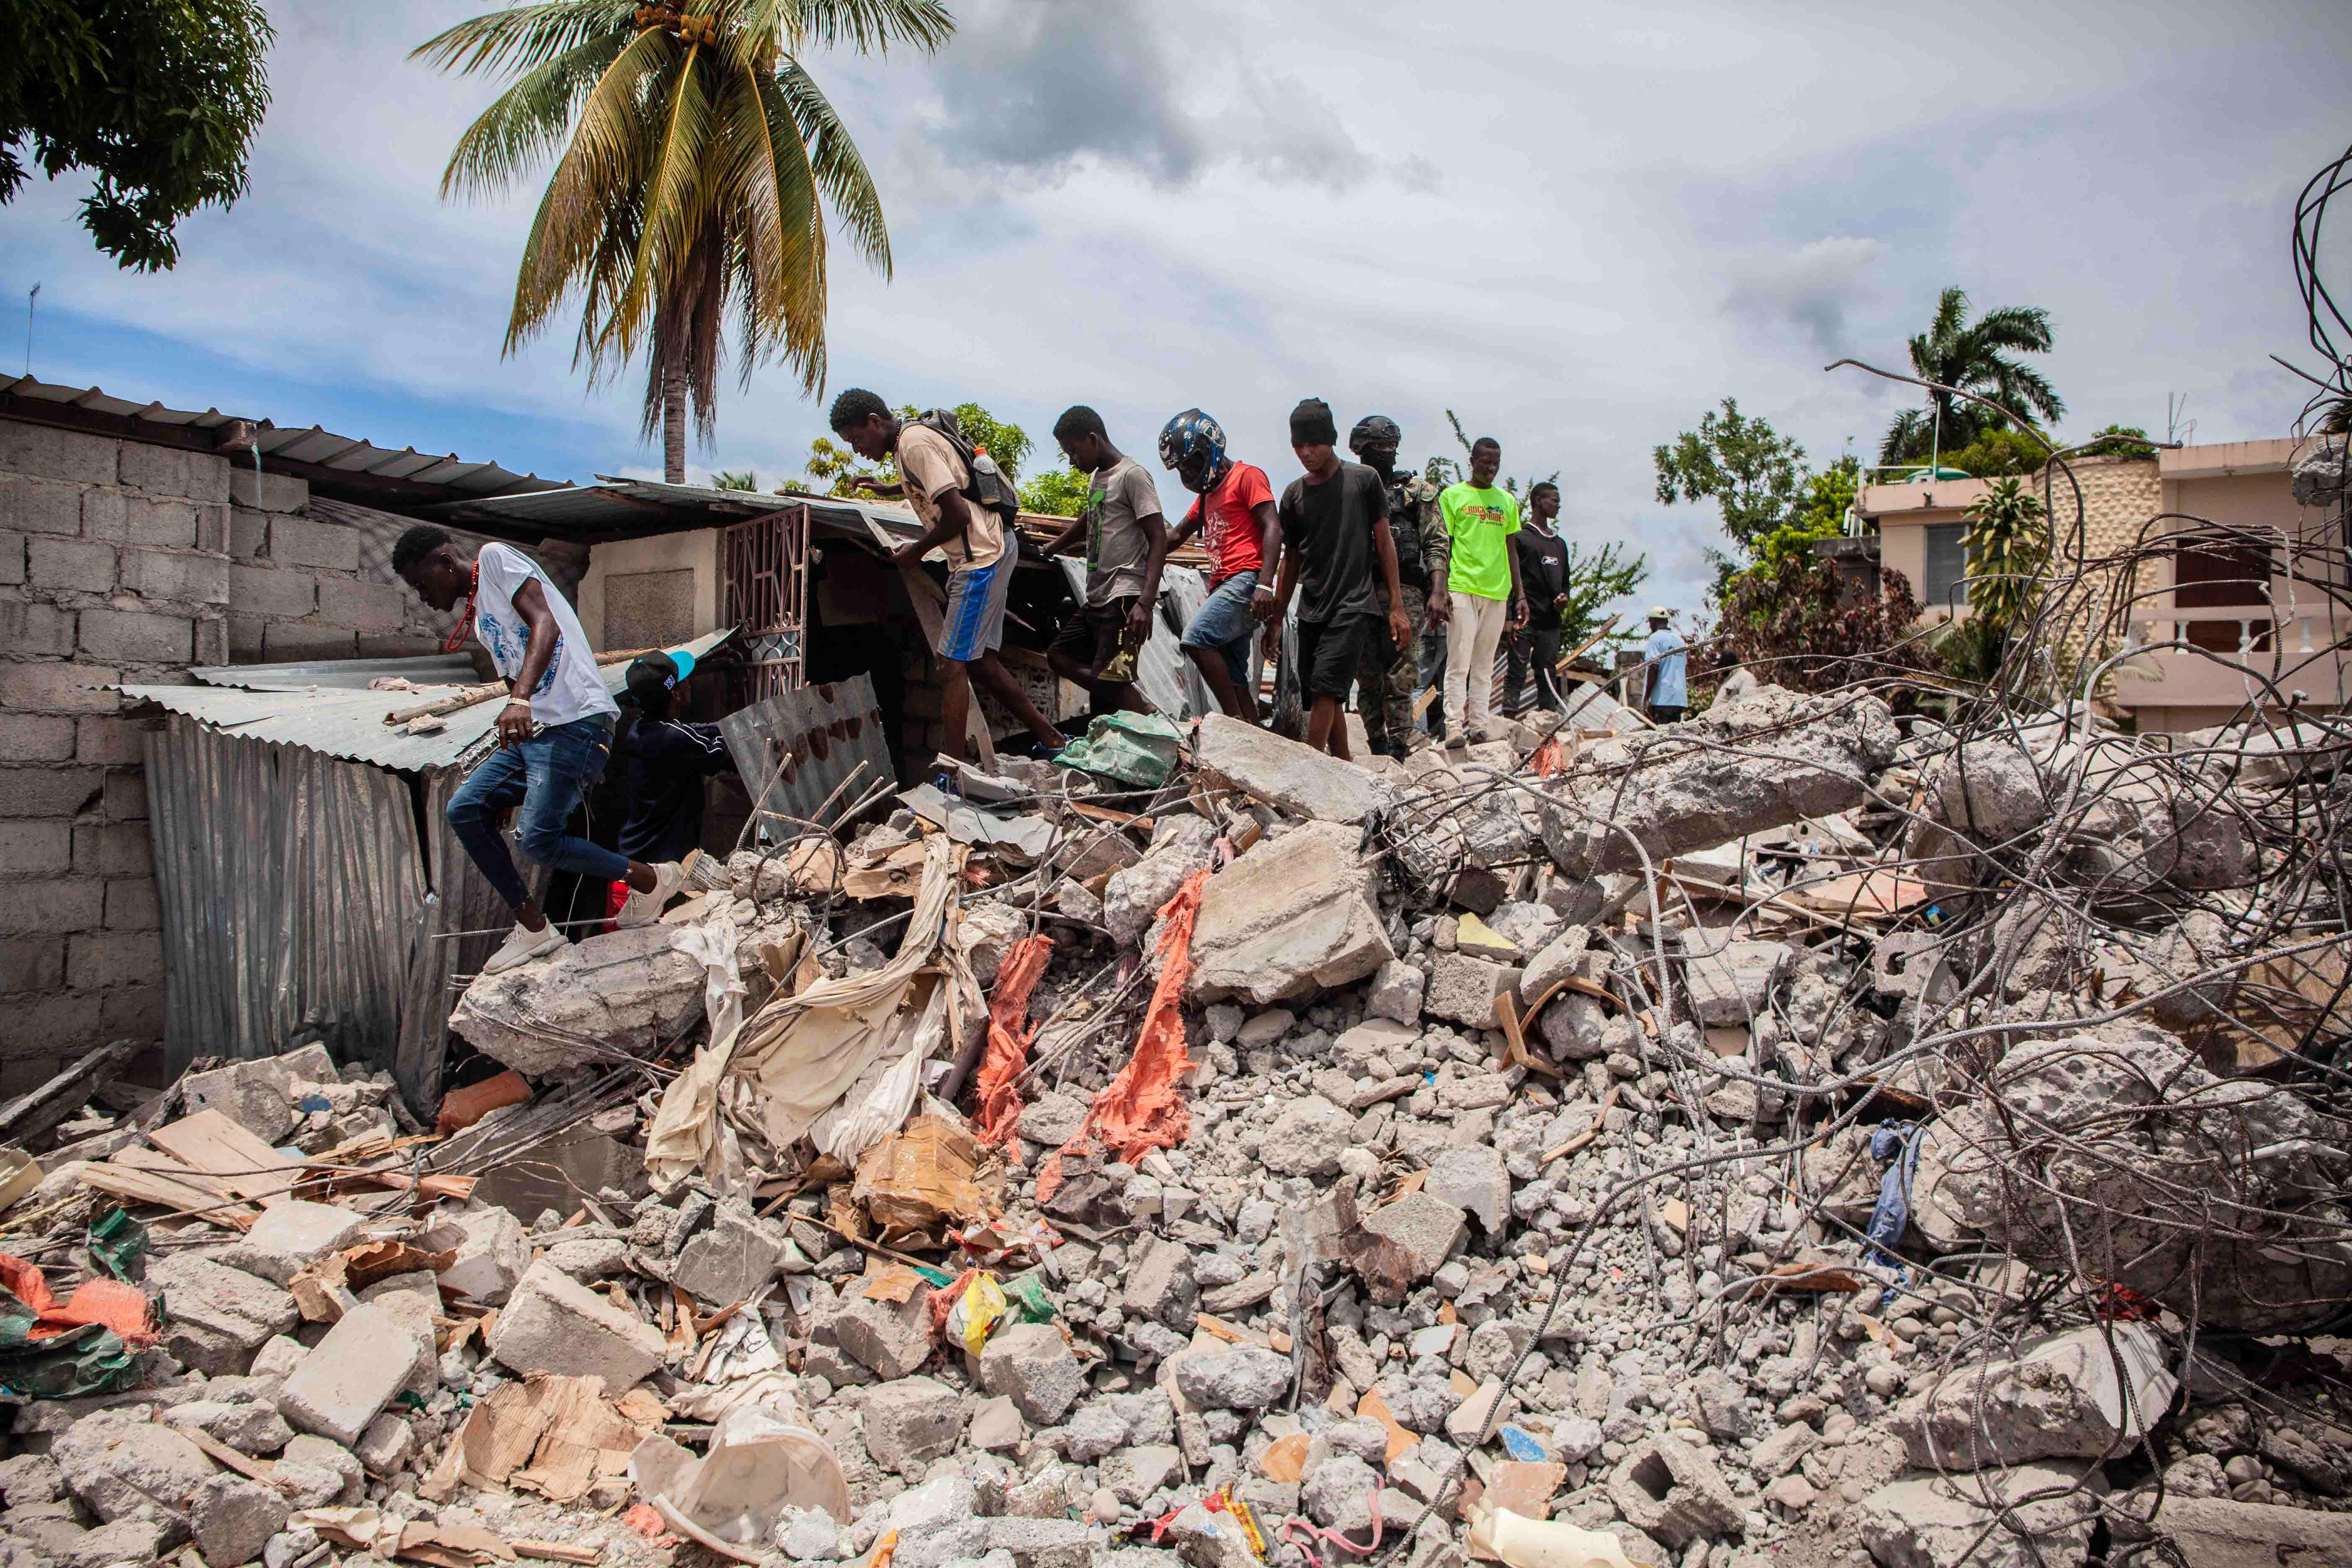 death-toll-in-haitian-earthquake-rises-to-over-14k-iheart